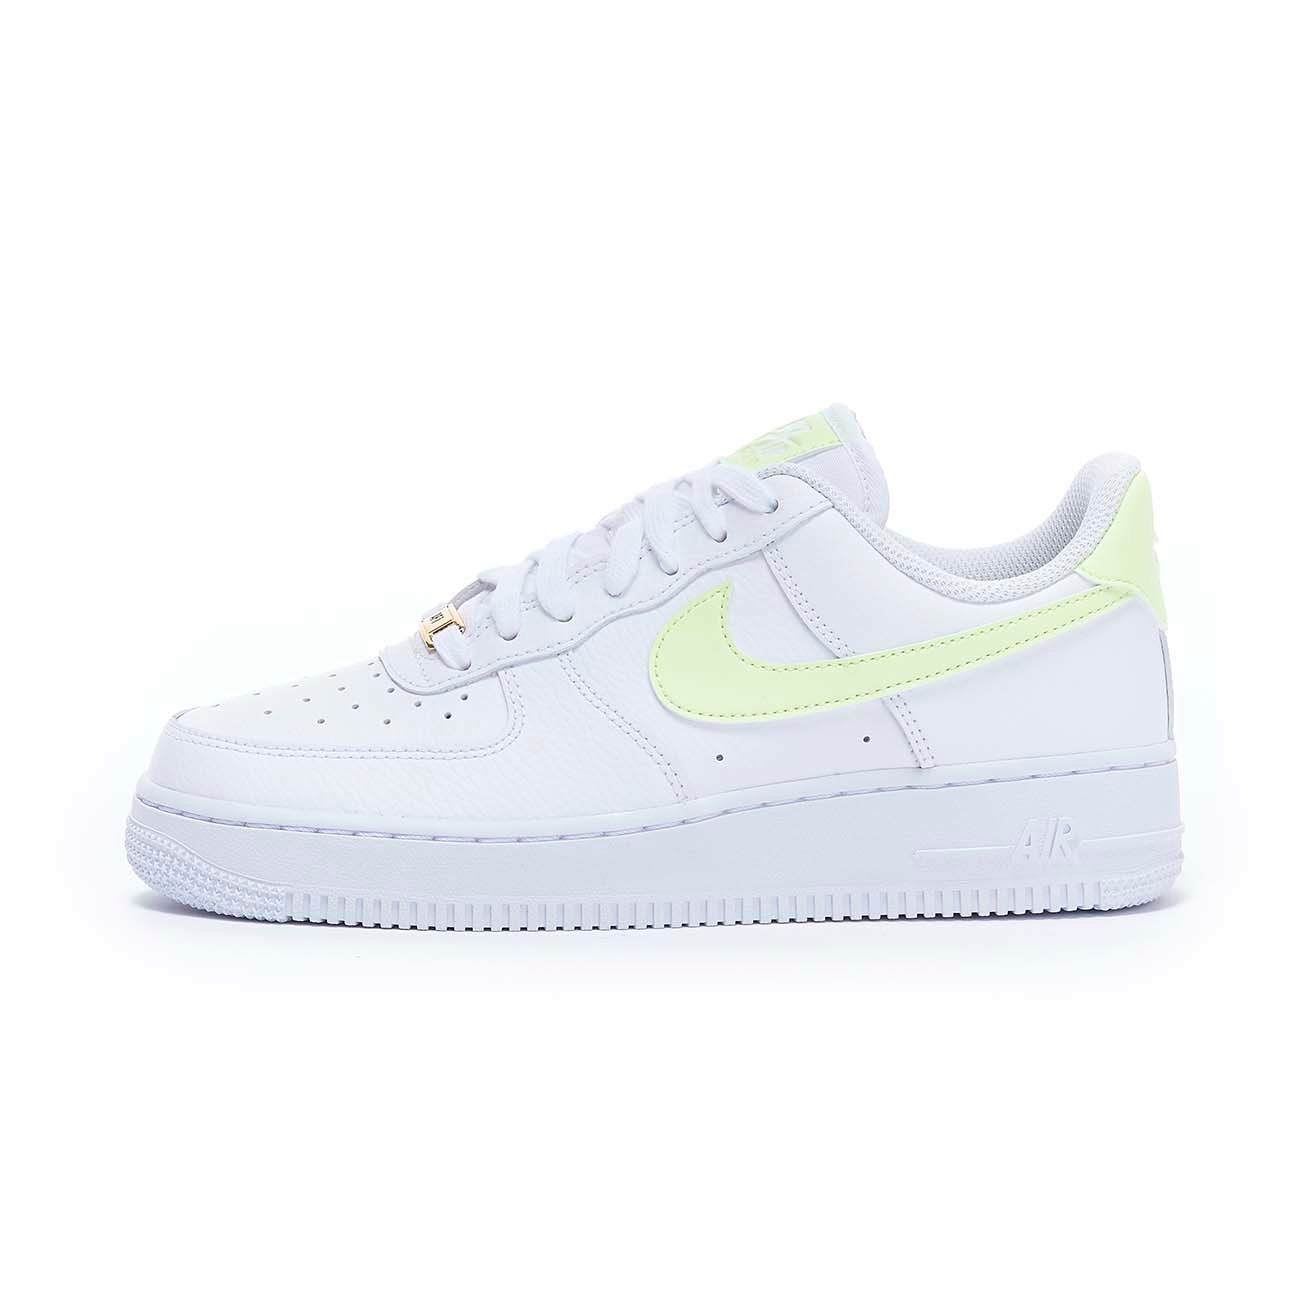 NIKE SNEAKERS AIR FORCE 1 '07 Donna White Barely volt | Mascheroni ...